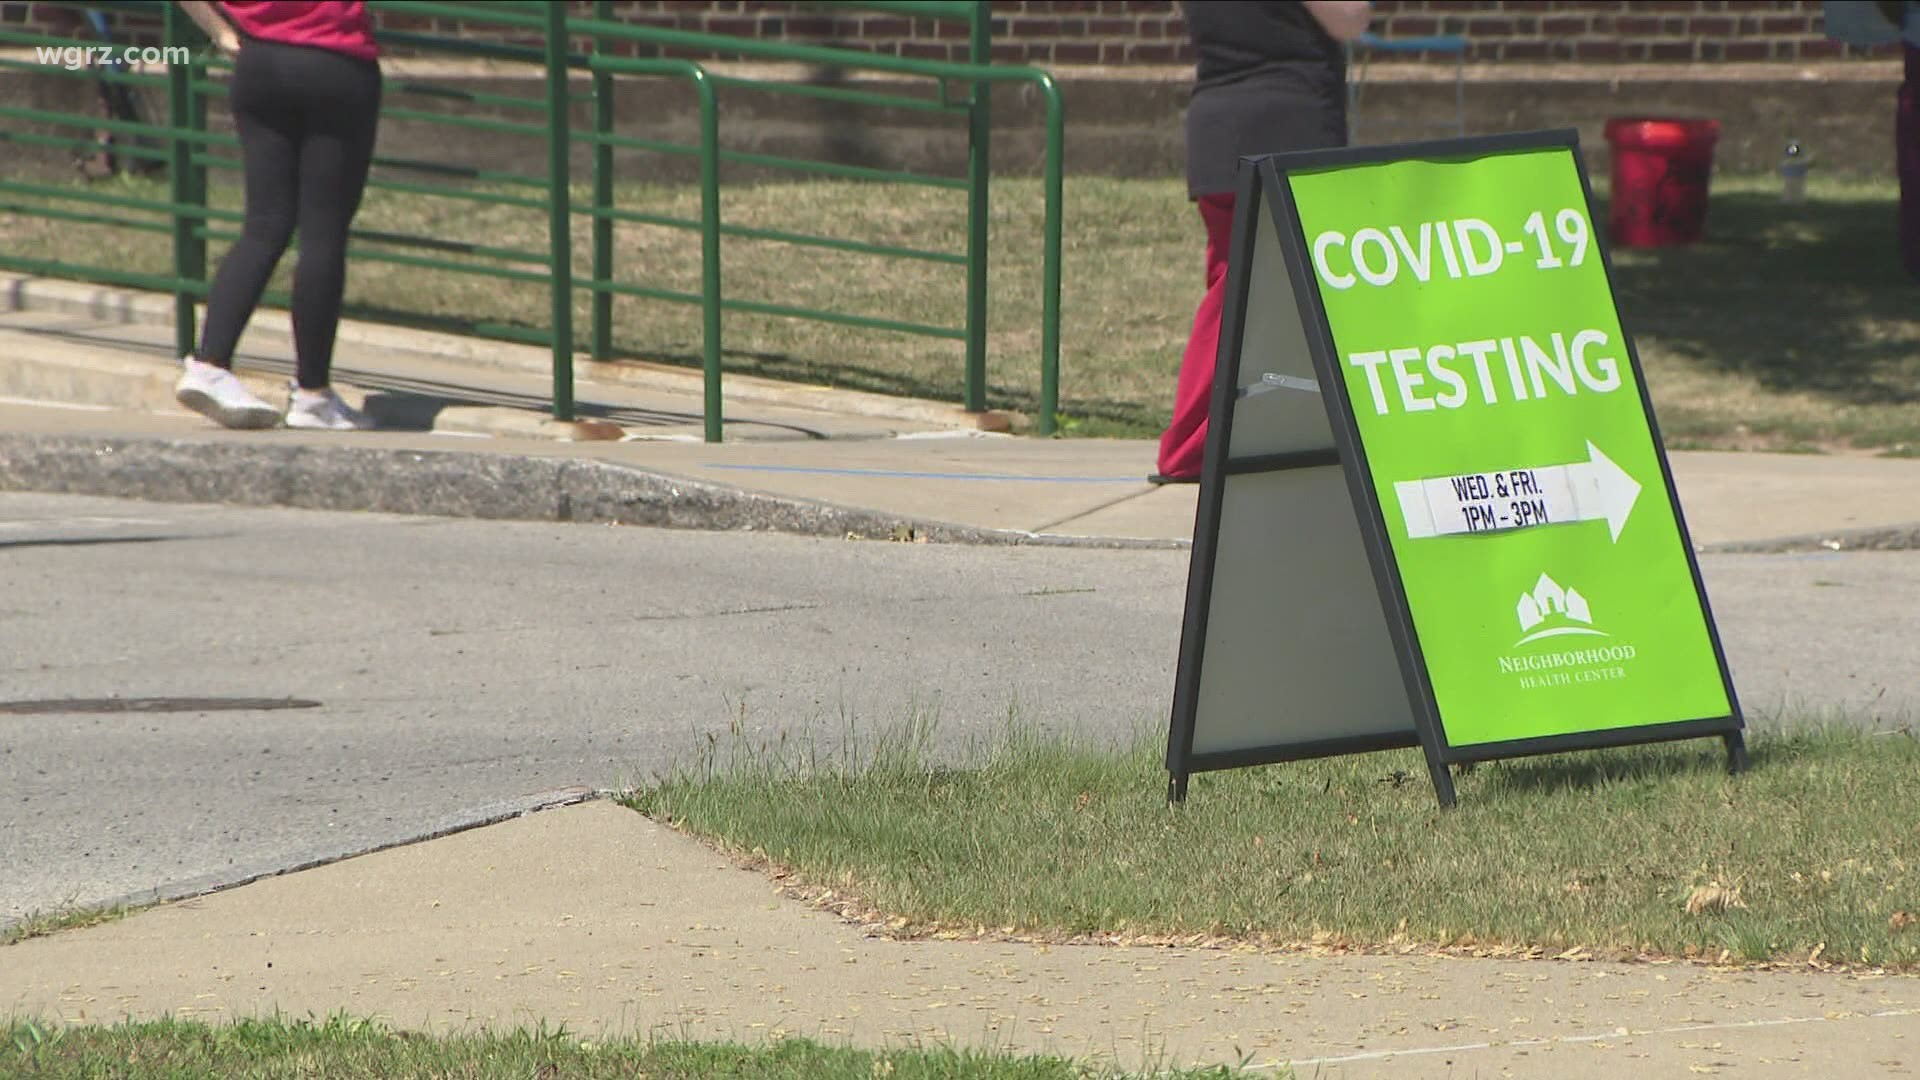 Demand for Covid testing causing delays